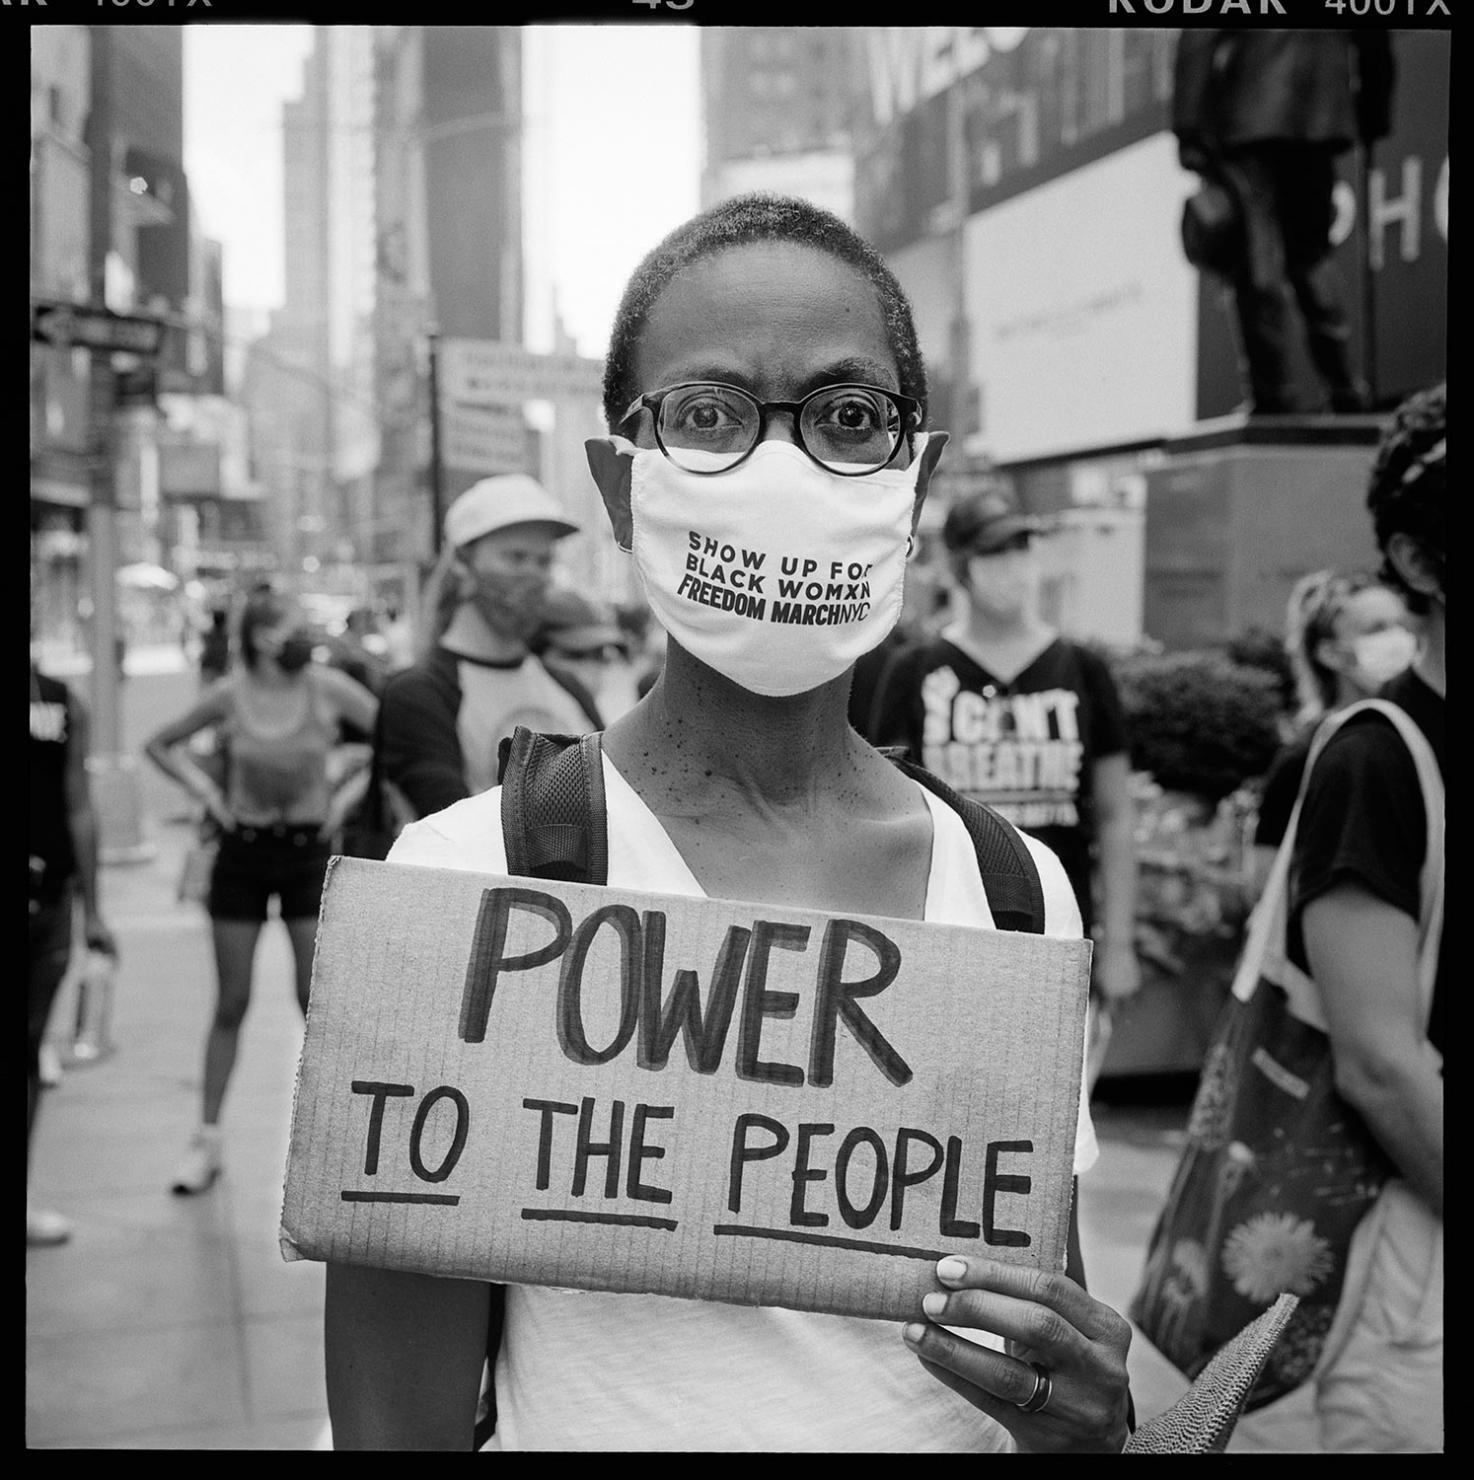 A person in glasses holding a cardboard sign that reads "Power to the people"